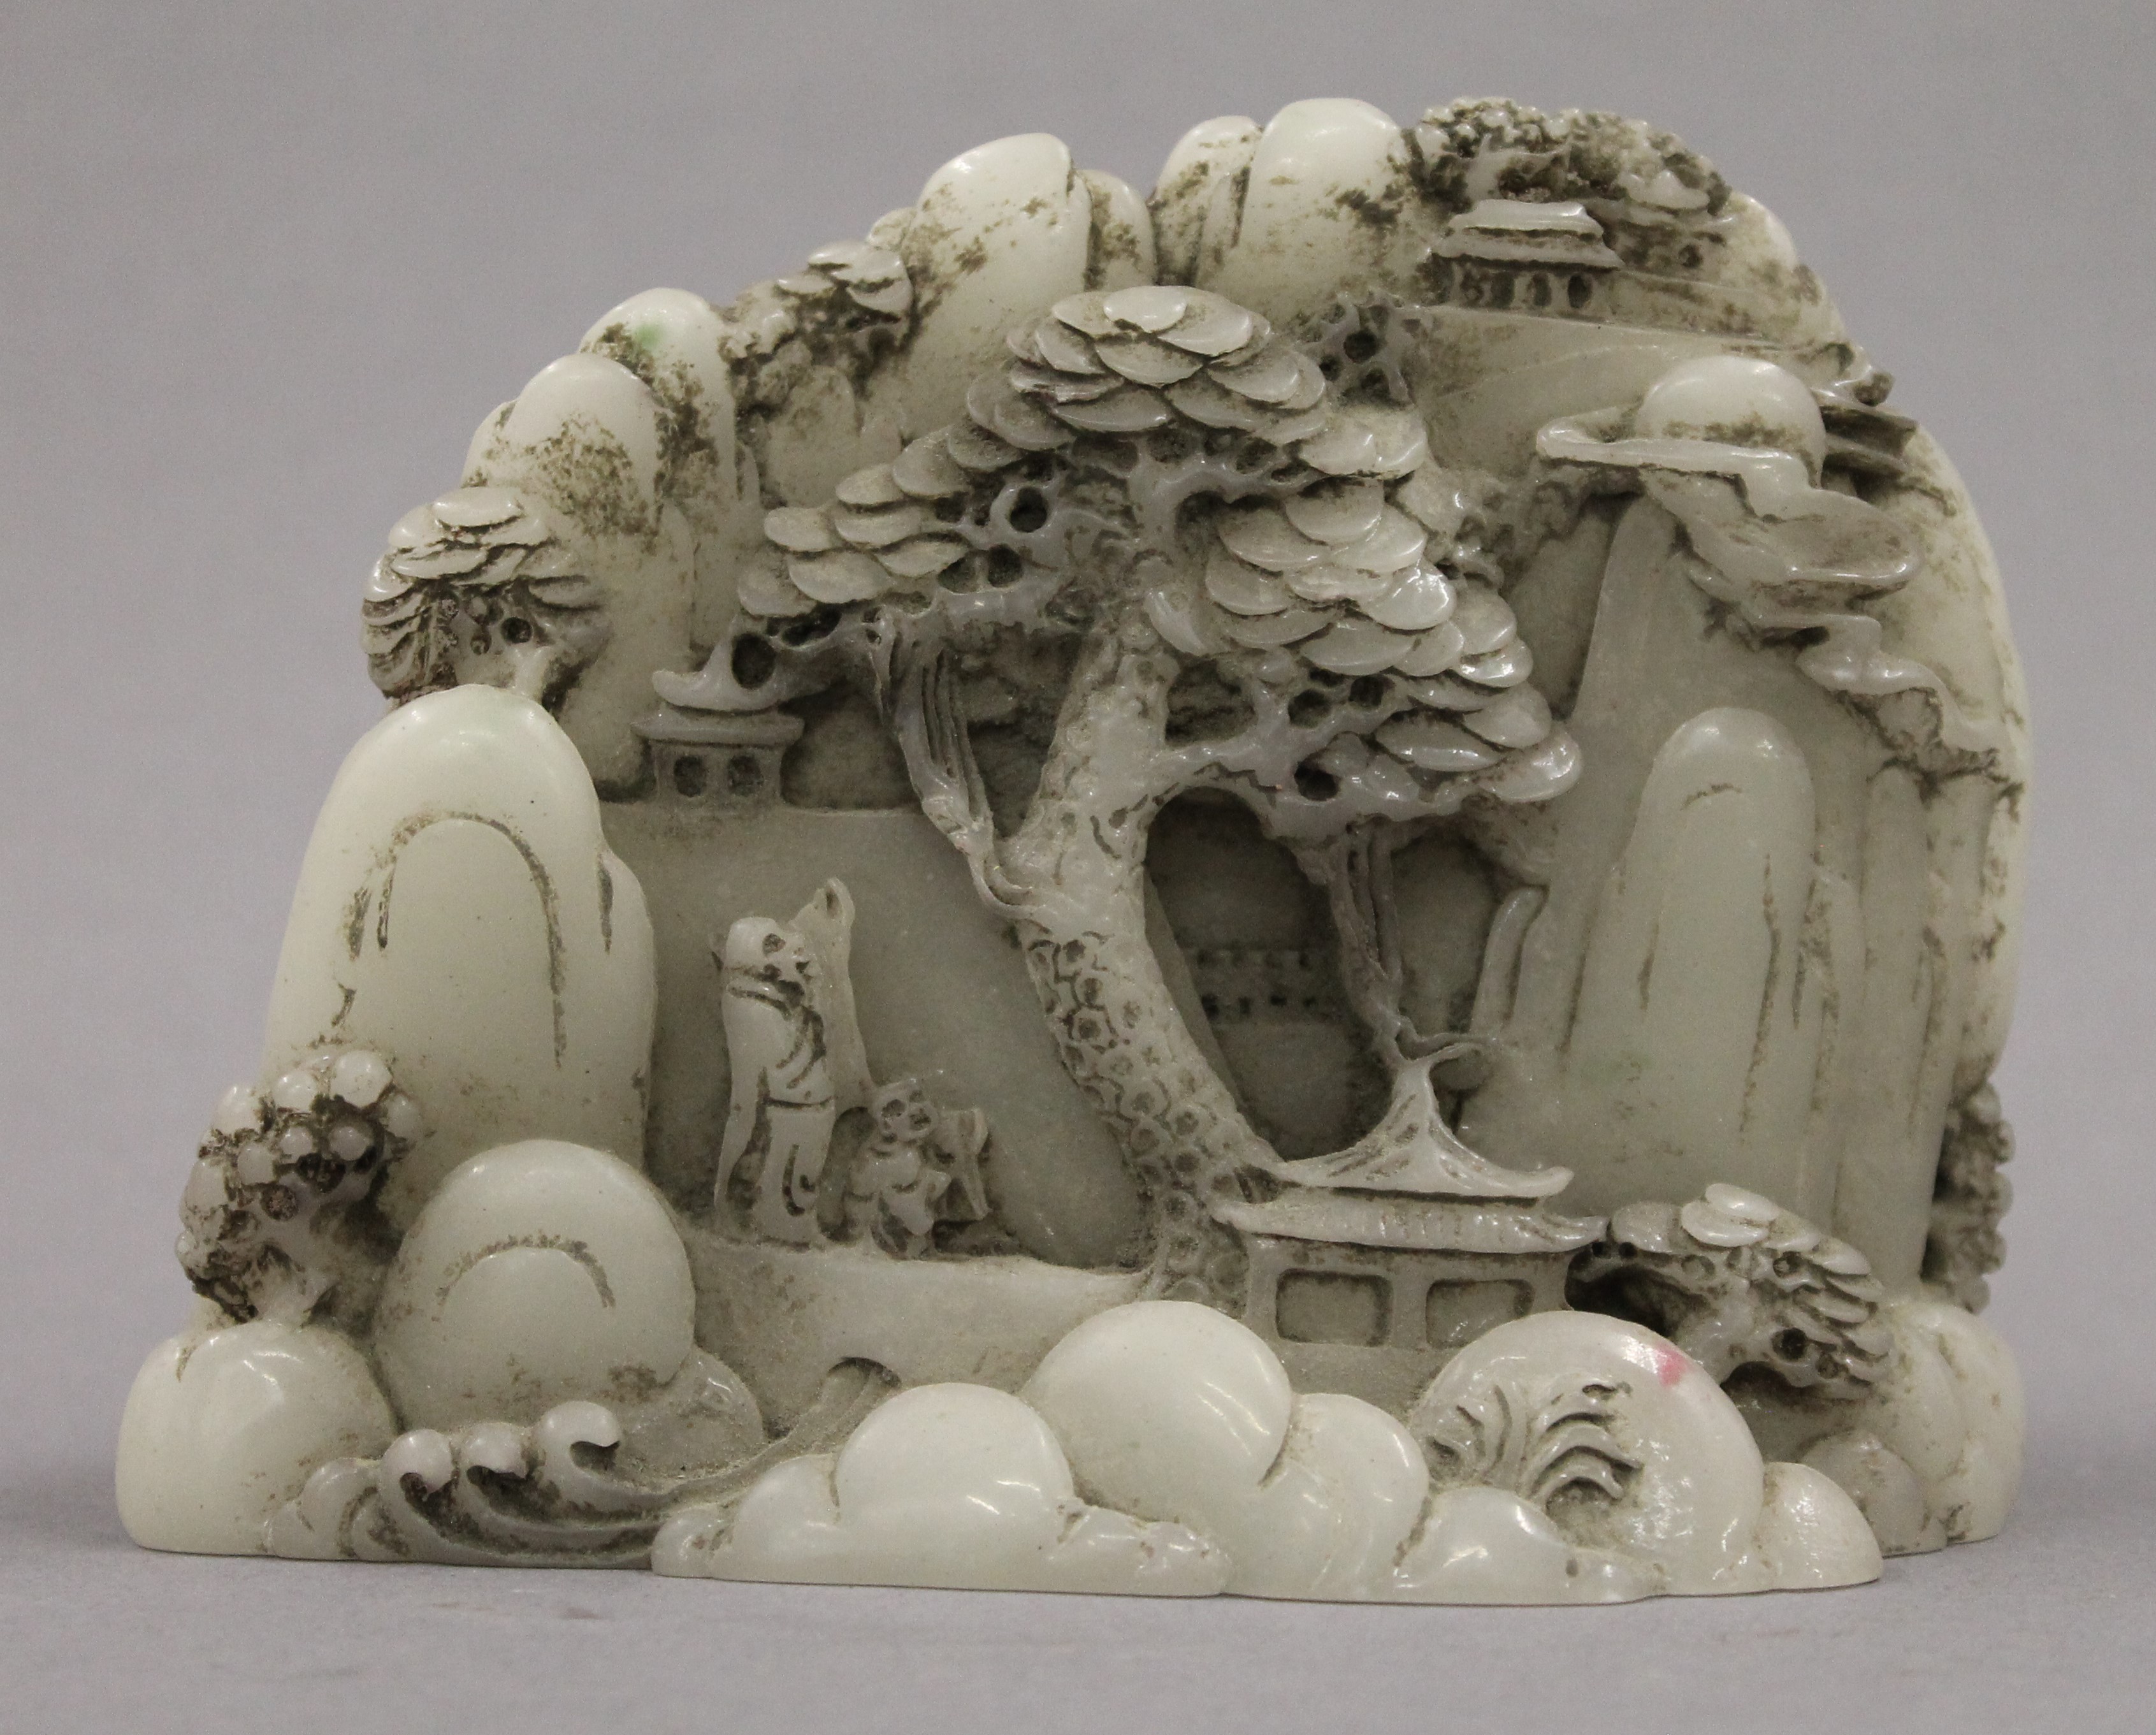 A Chinese model of a mountainous landscape. 13 cm wide.